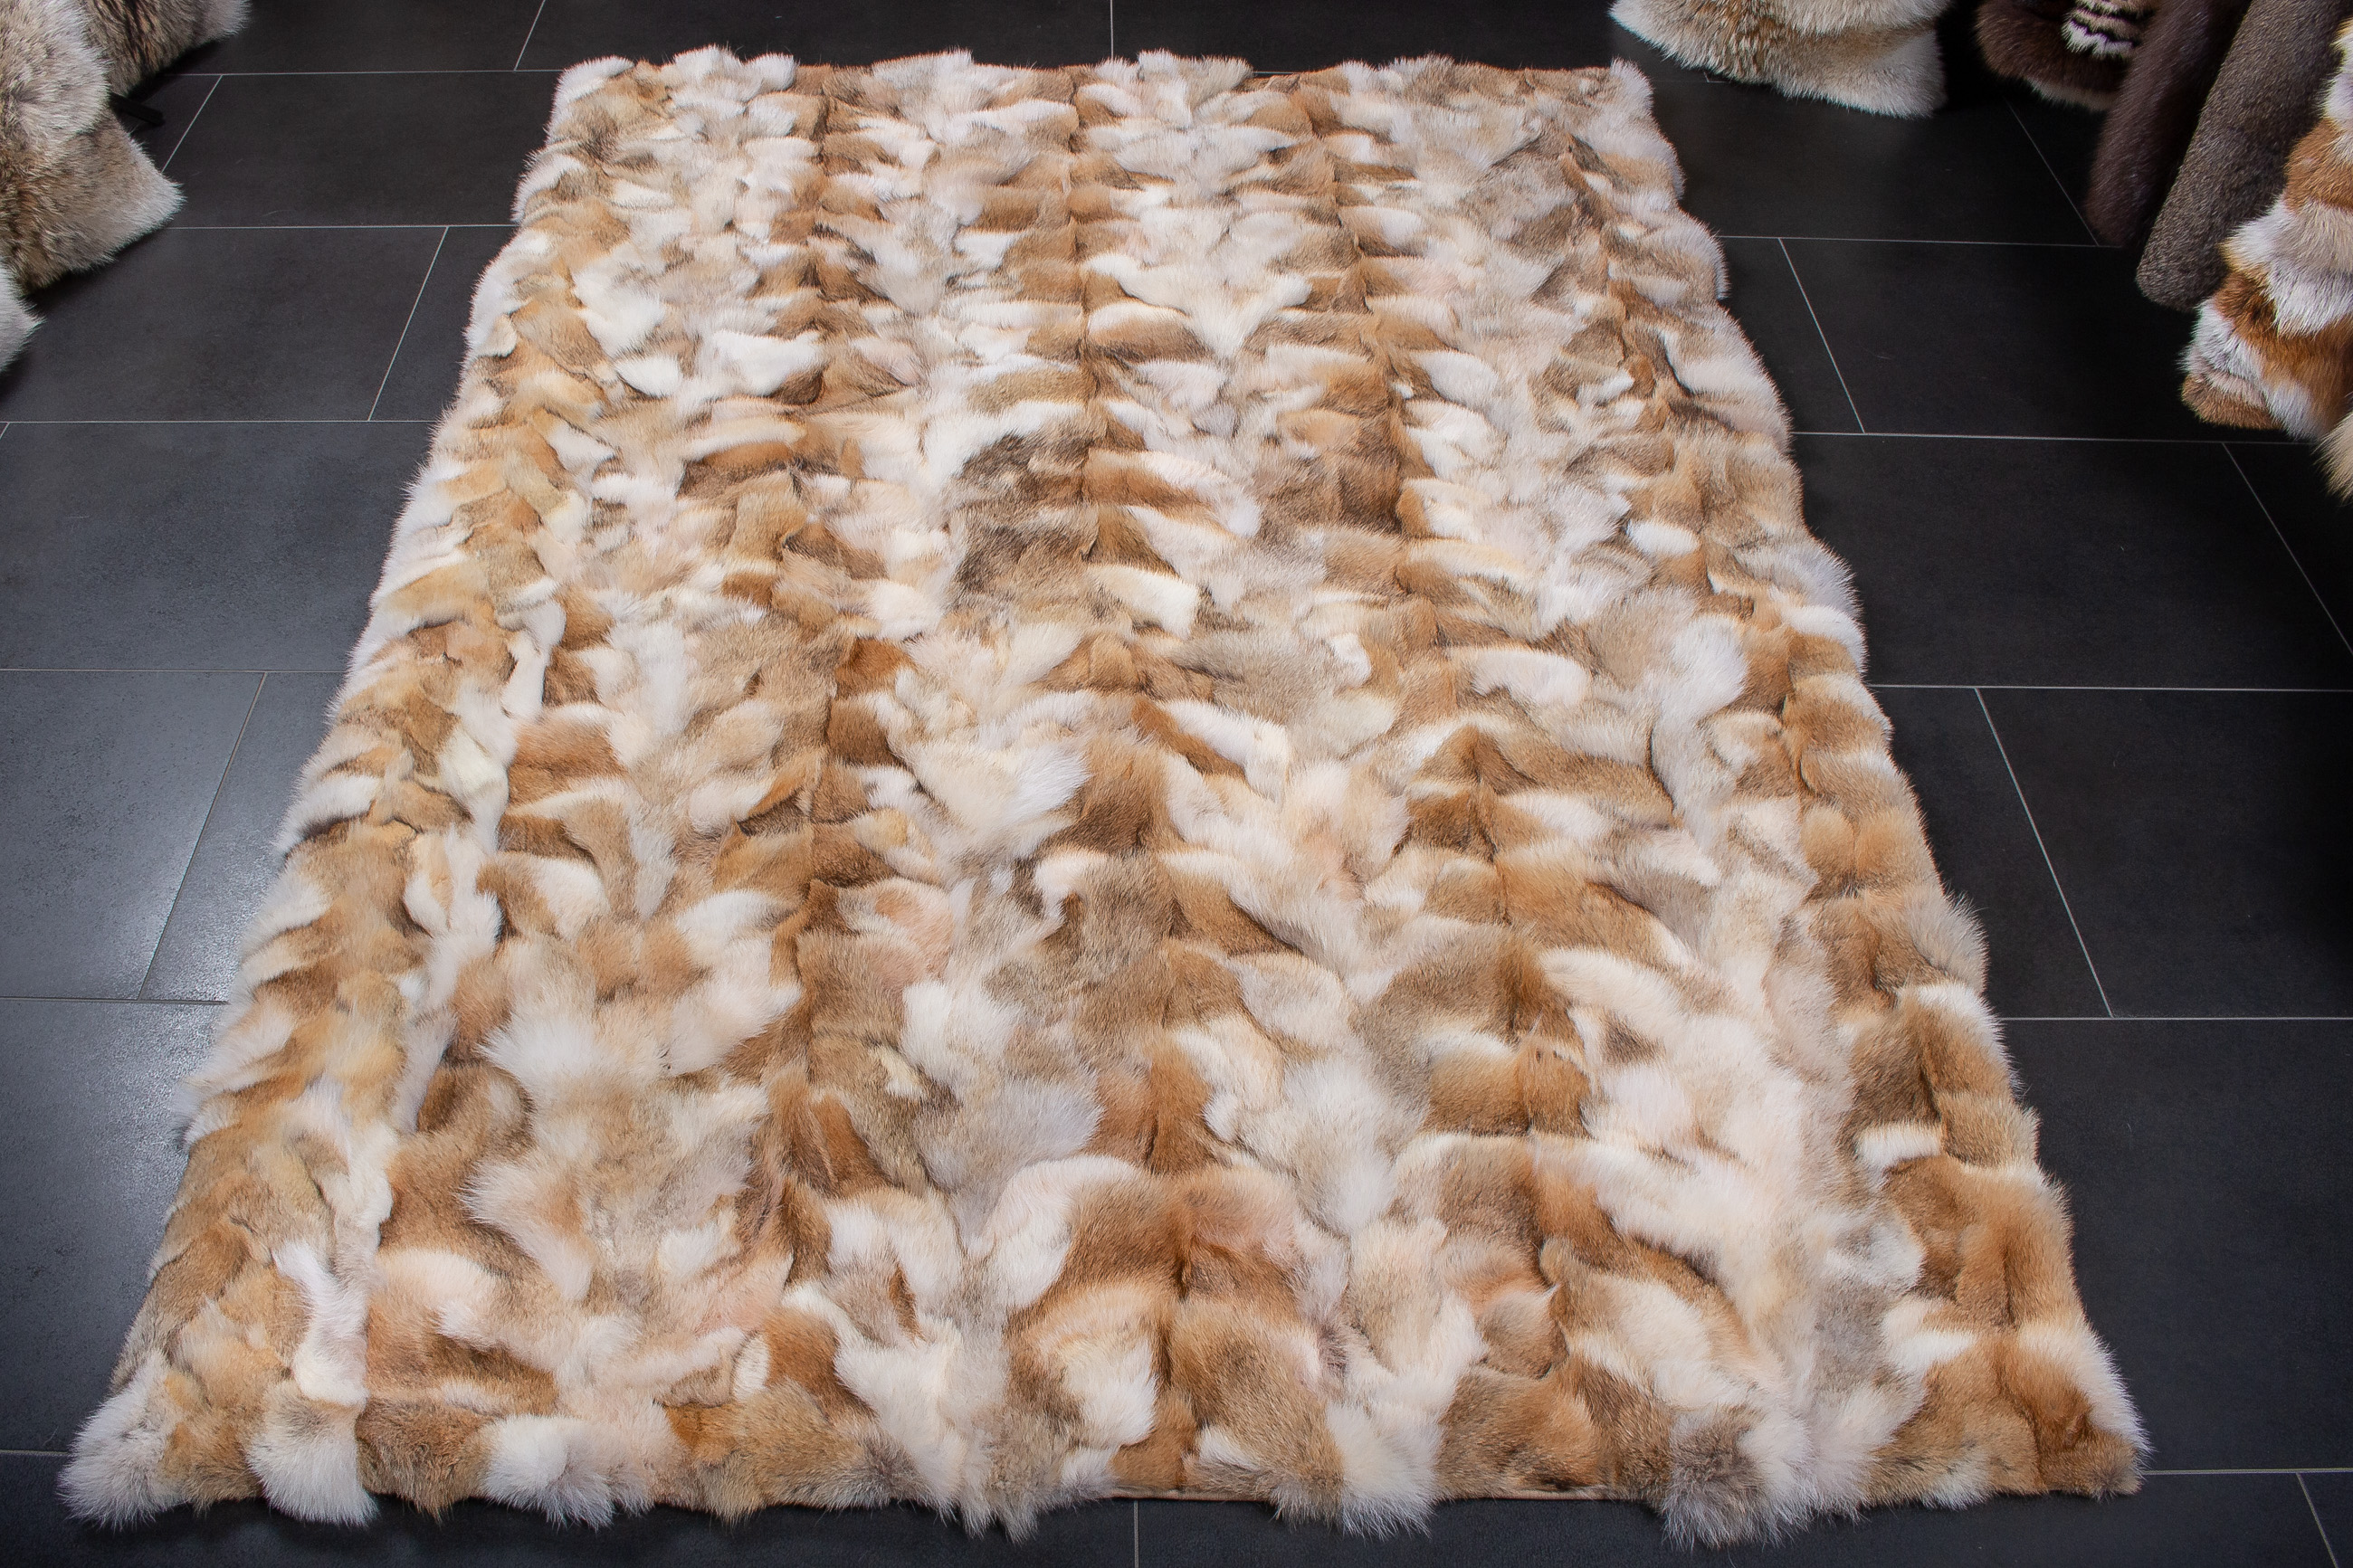 Real Fur Carpet made of Canadian Coyote